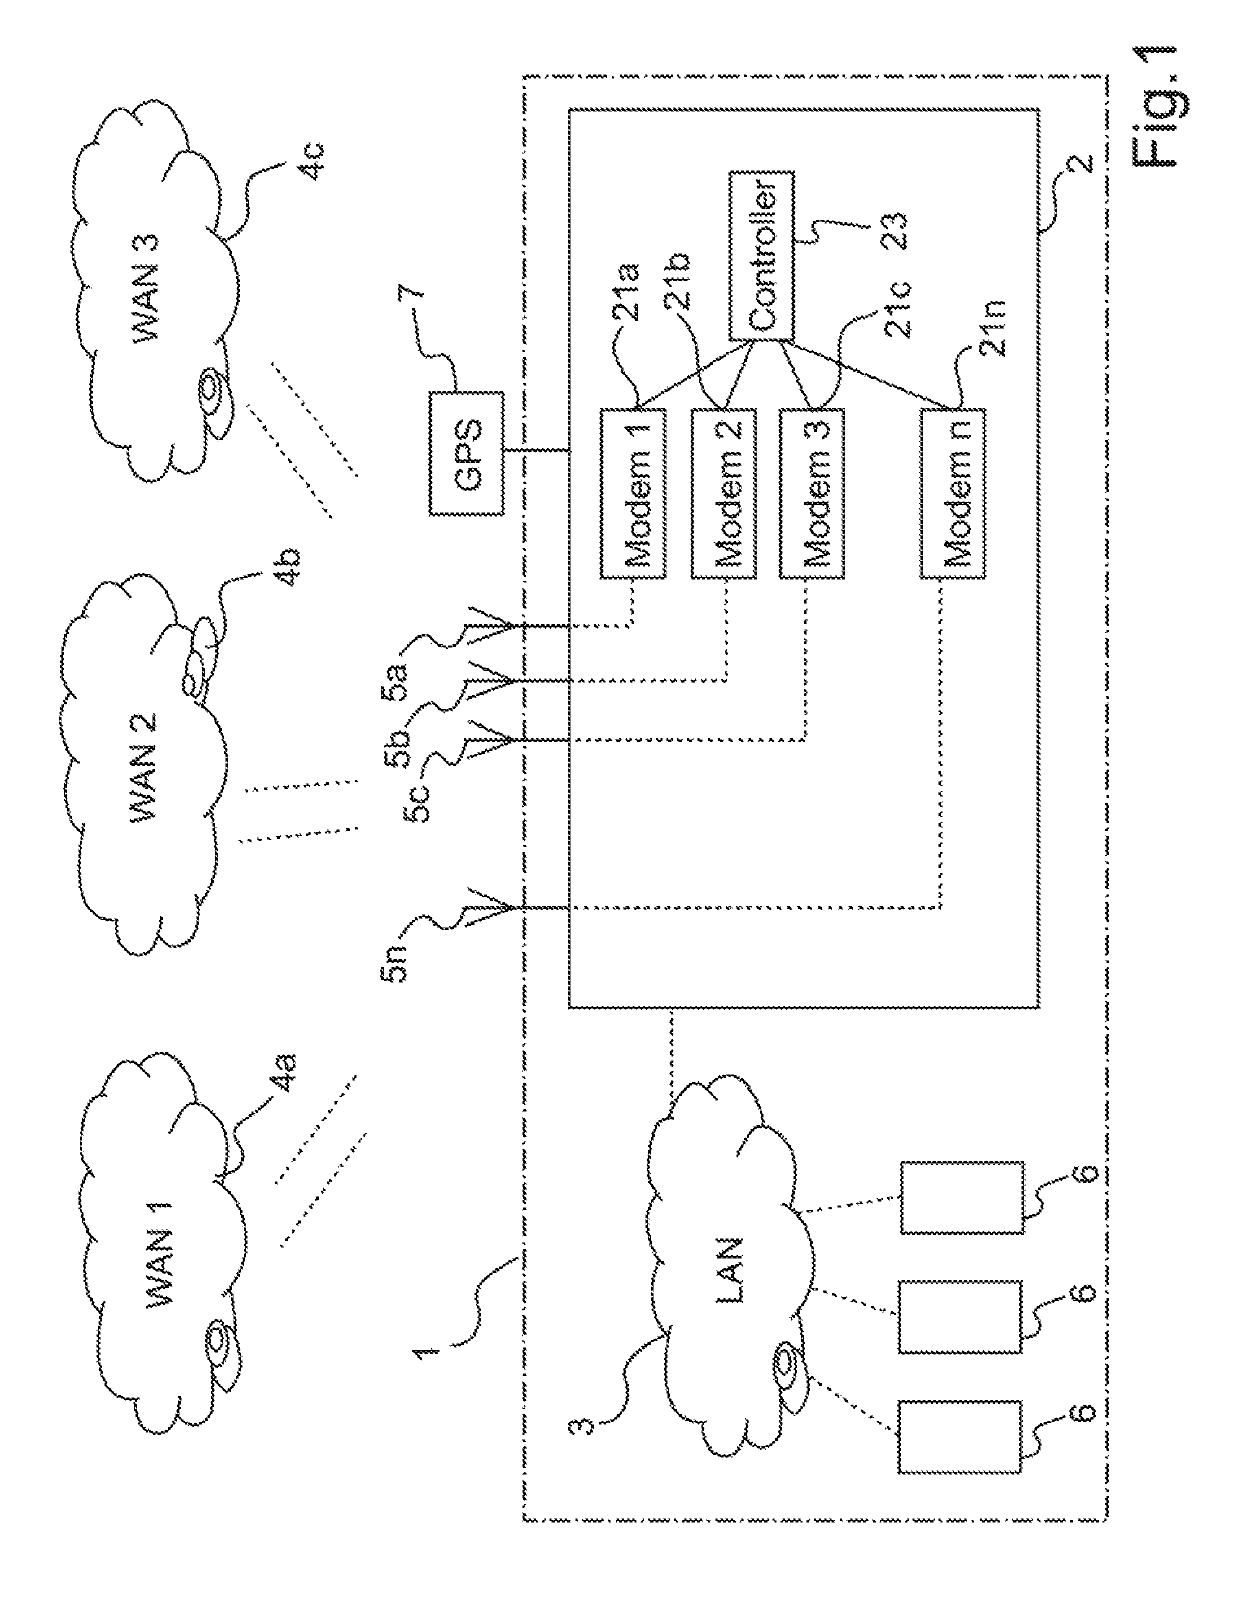 Method and system for dynamic selection of communication paths for a moving vehicle